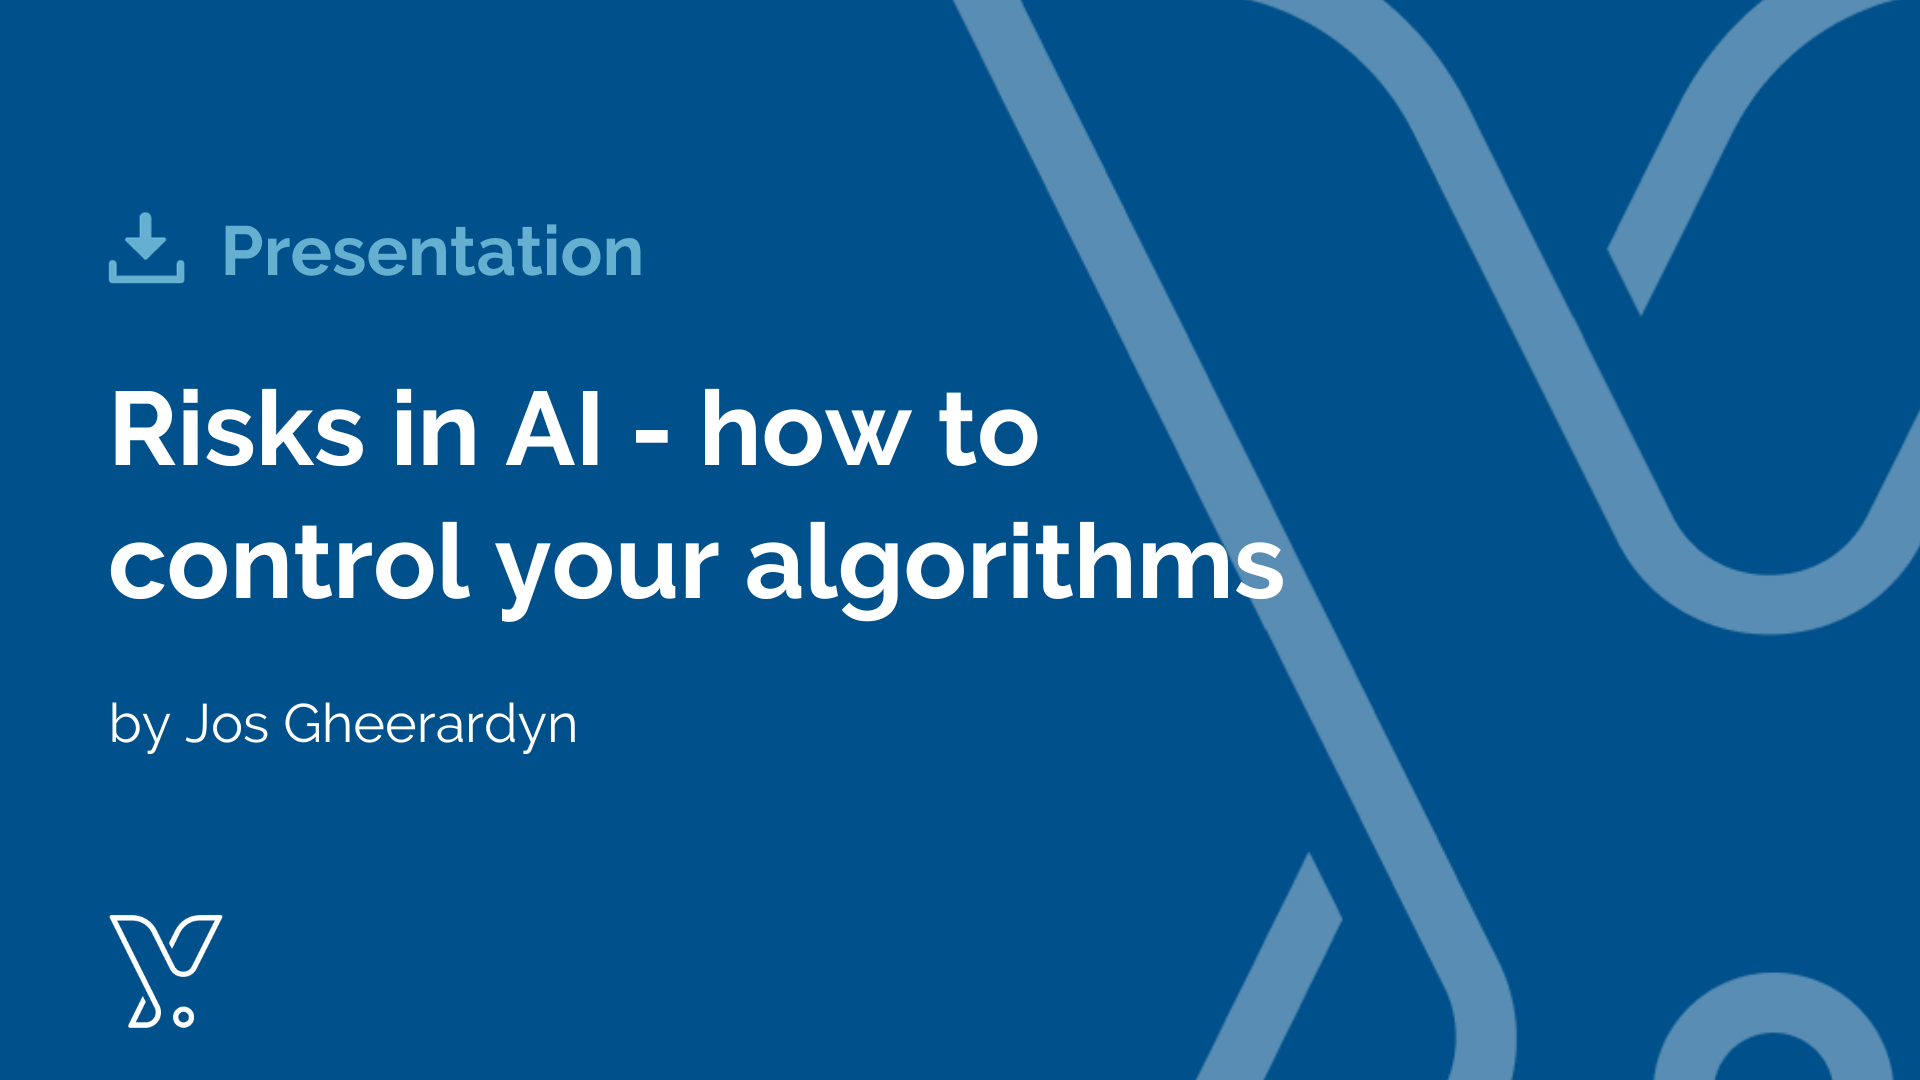 Risks in AI – How to control your algorithms